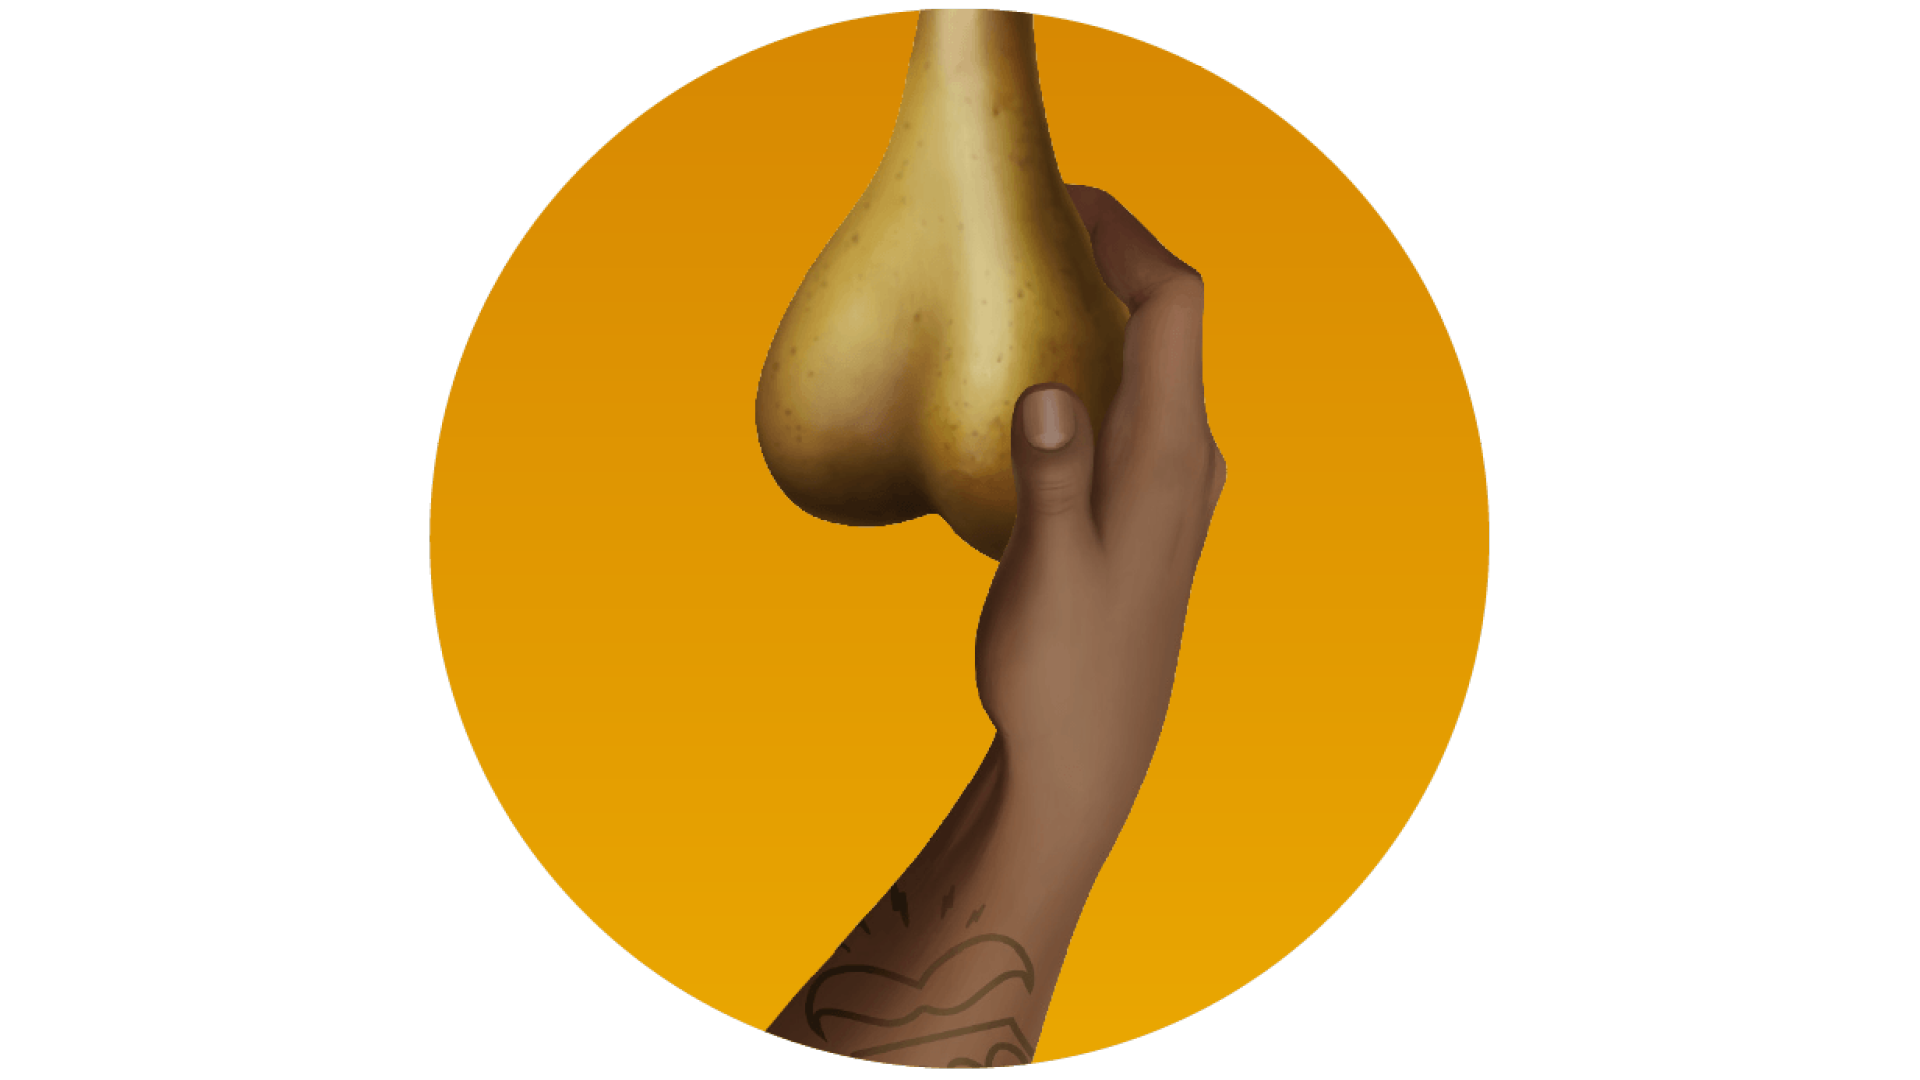 An illustration of a hand feeling a pear (which looks like a pair of testicles)